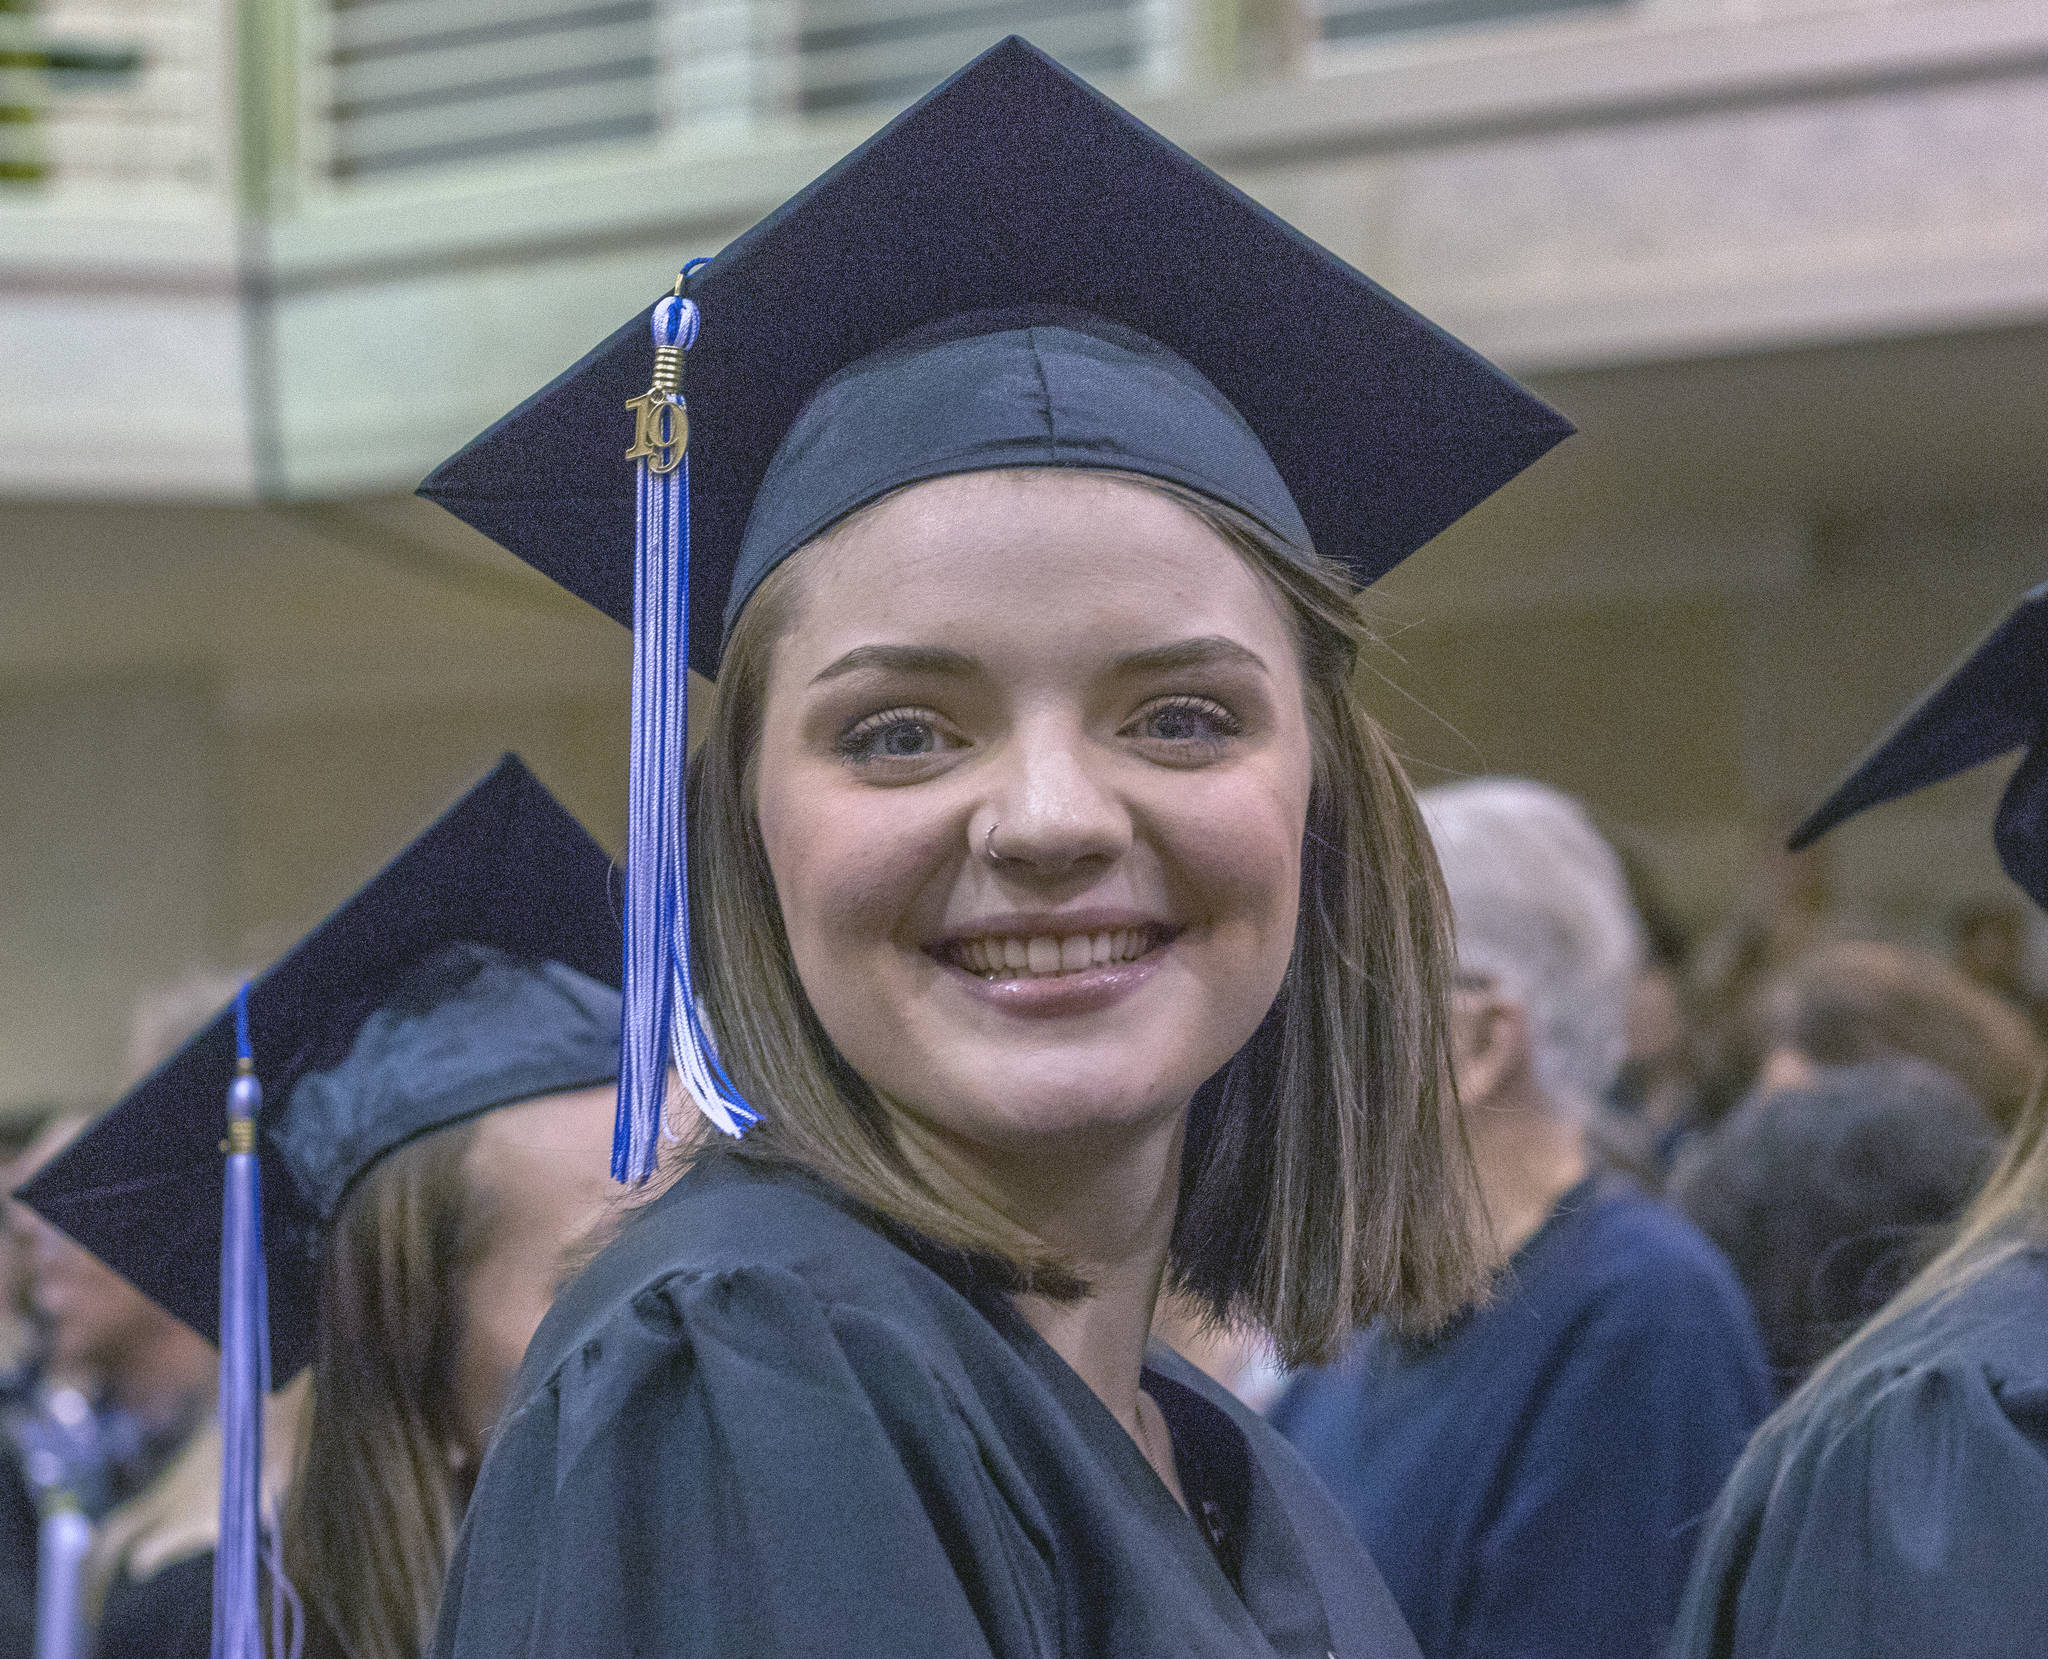 Hannah Cassell graduated with a Bachelor of Arts degree in Social Sciences from the University of Alaska Southeast on Sunday, May 5, 2019. (Erin Laughlin | For the Juneau Empire)